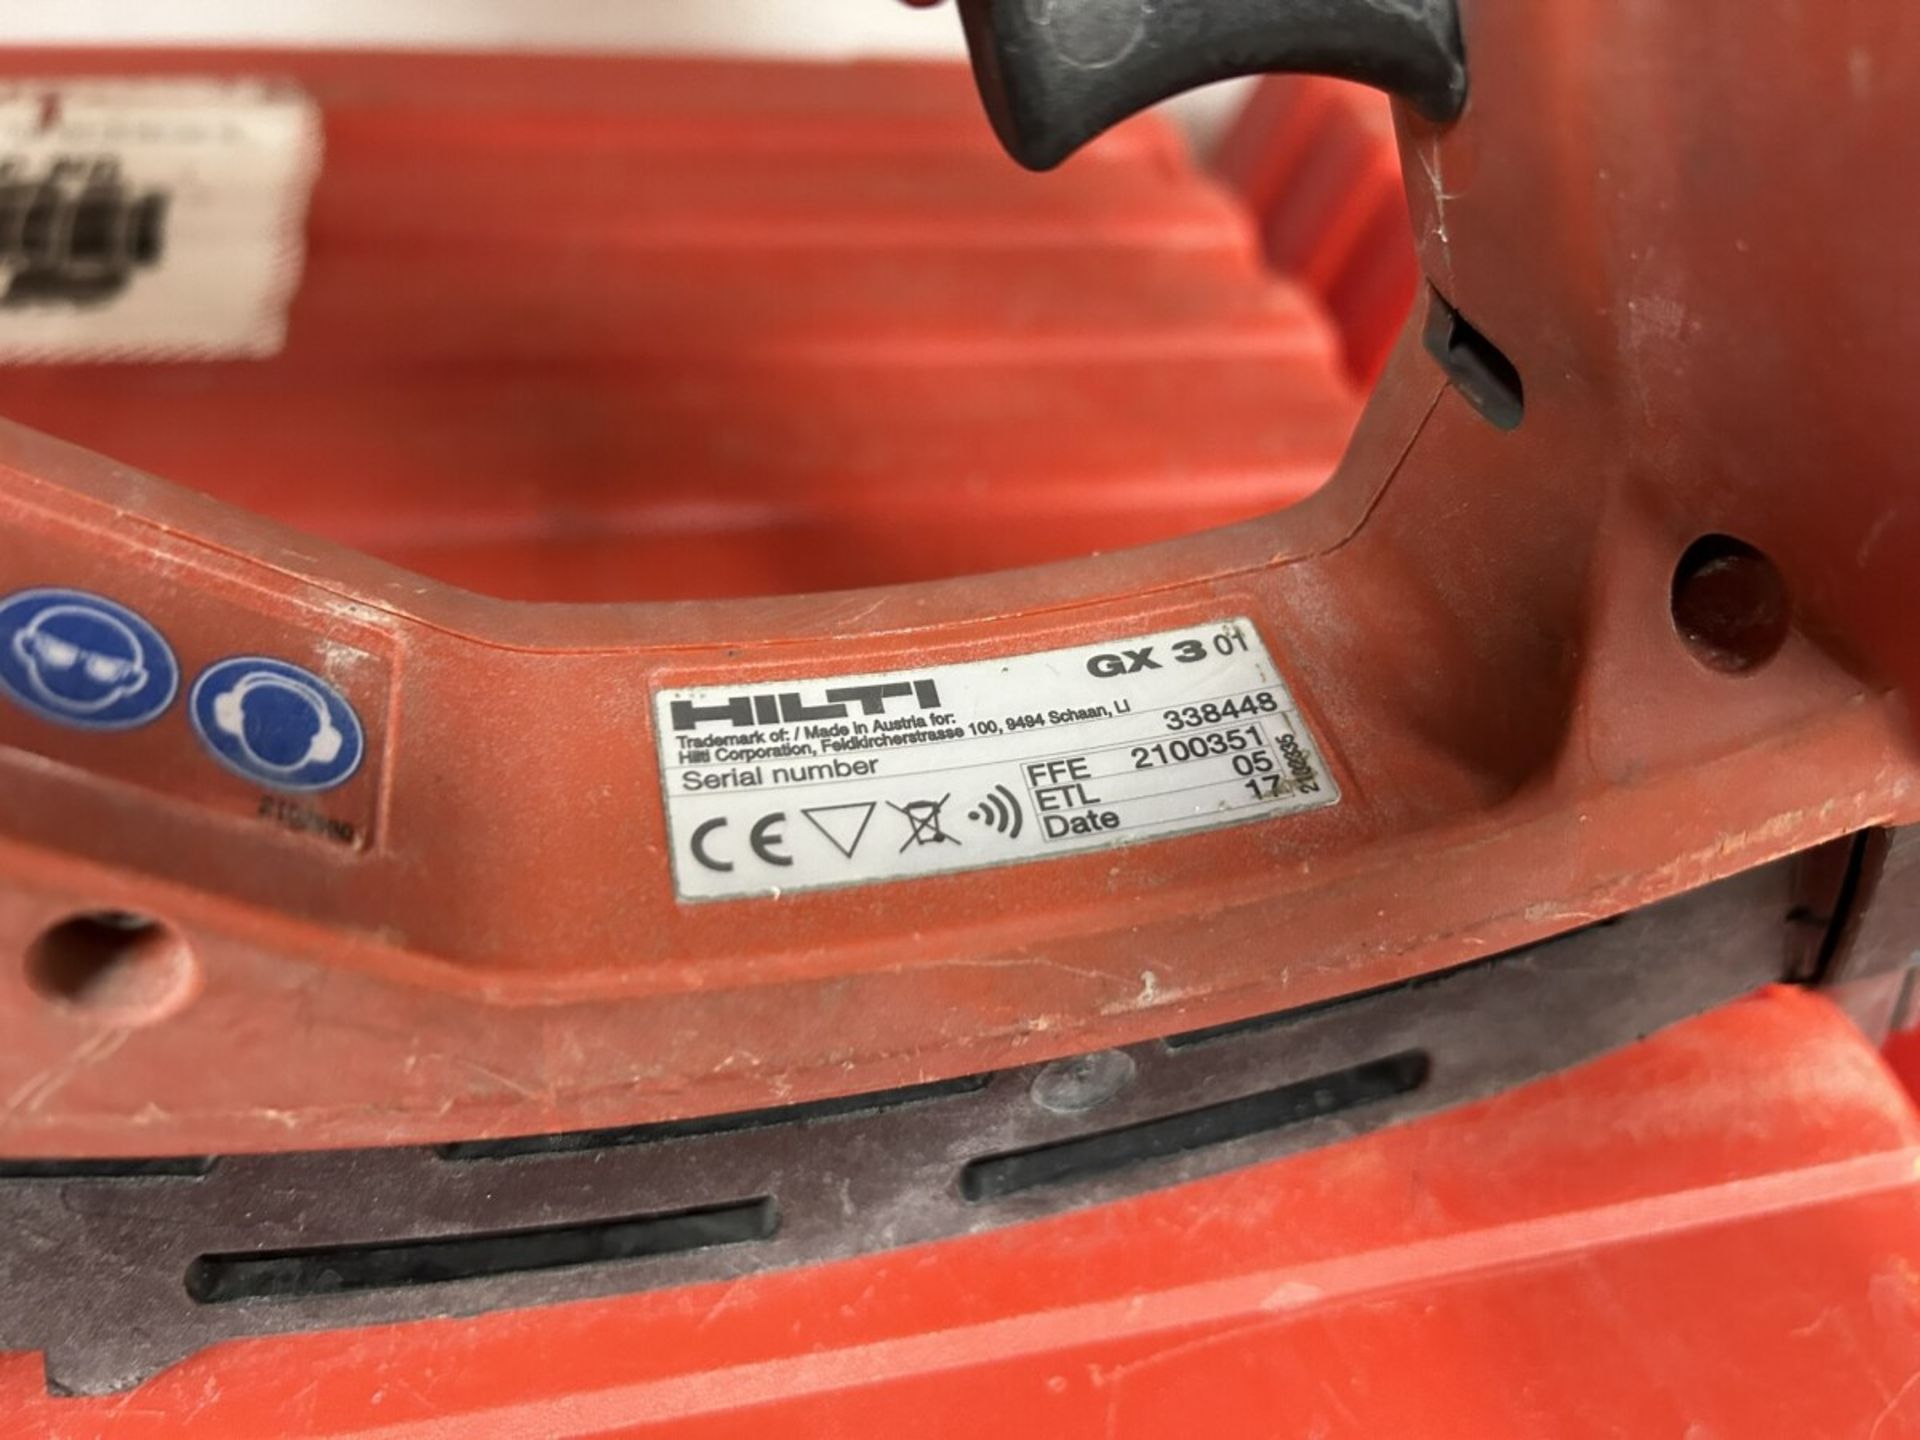 HILTI GX 3 GAS-ACTUATED FASTENING TOOL GAS NAILER WITH SINGLE POWER SOURCE FOR DRYWALL TRACK, - Image 5 of 6